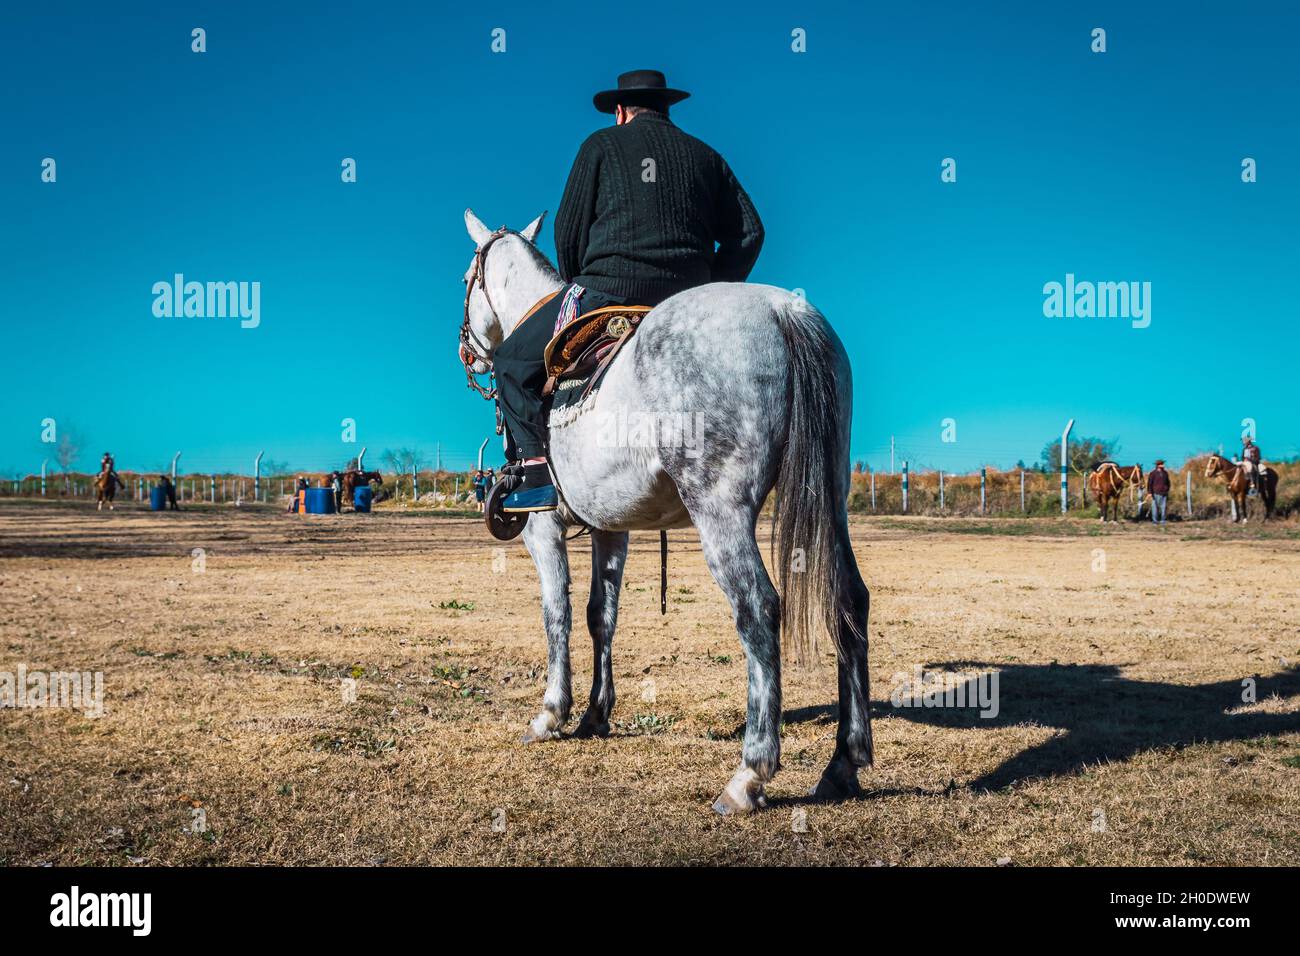 Argentine gaucho with hat on horse Stock Photo